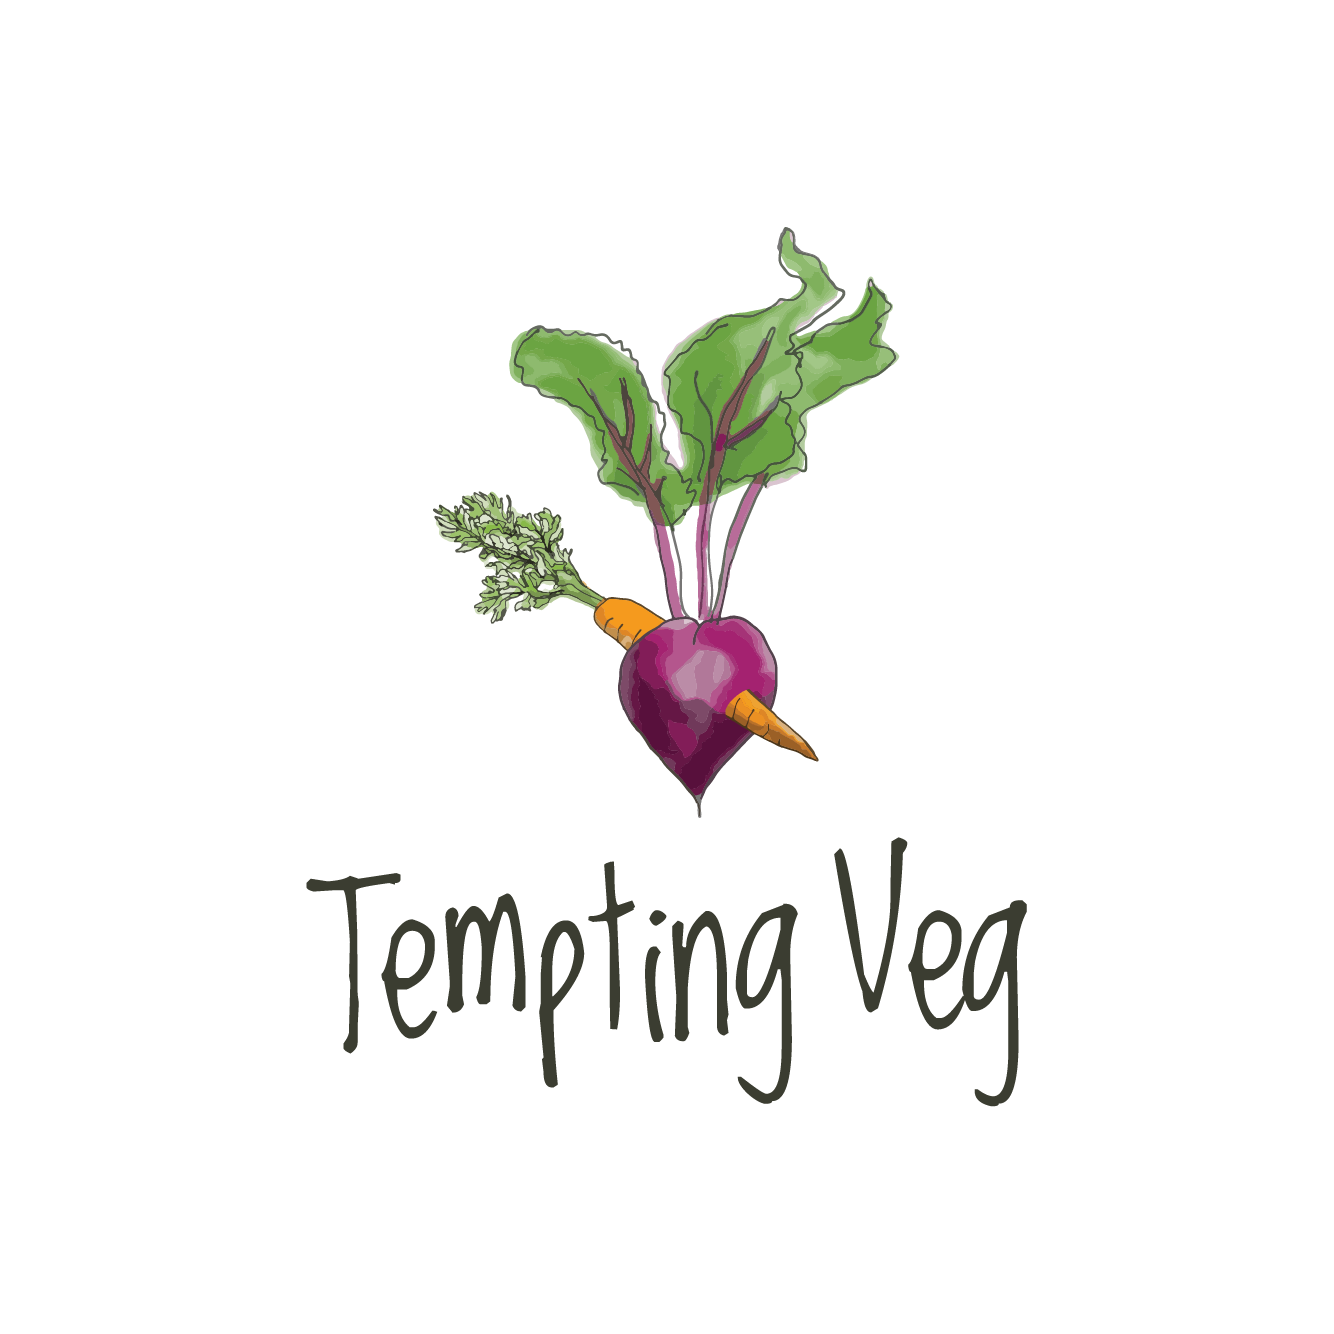 brand design by blade_feature logo_tempting veg.png